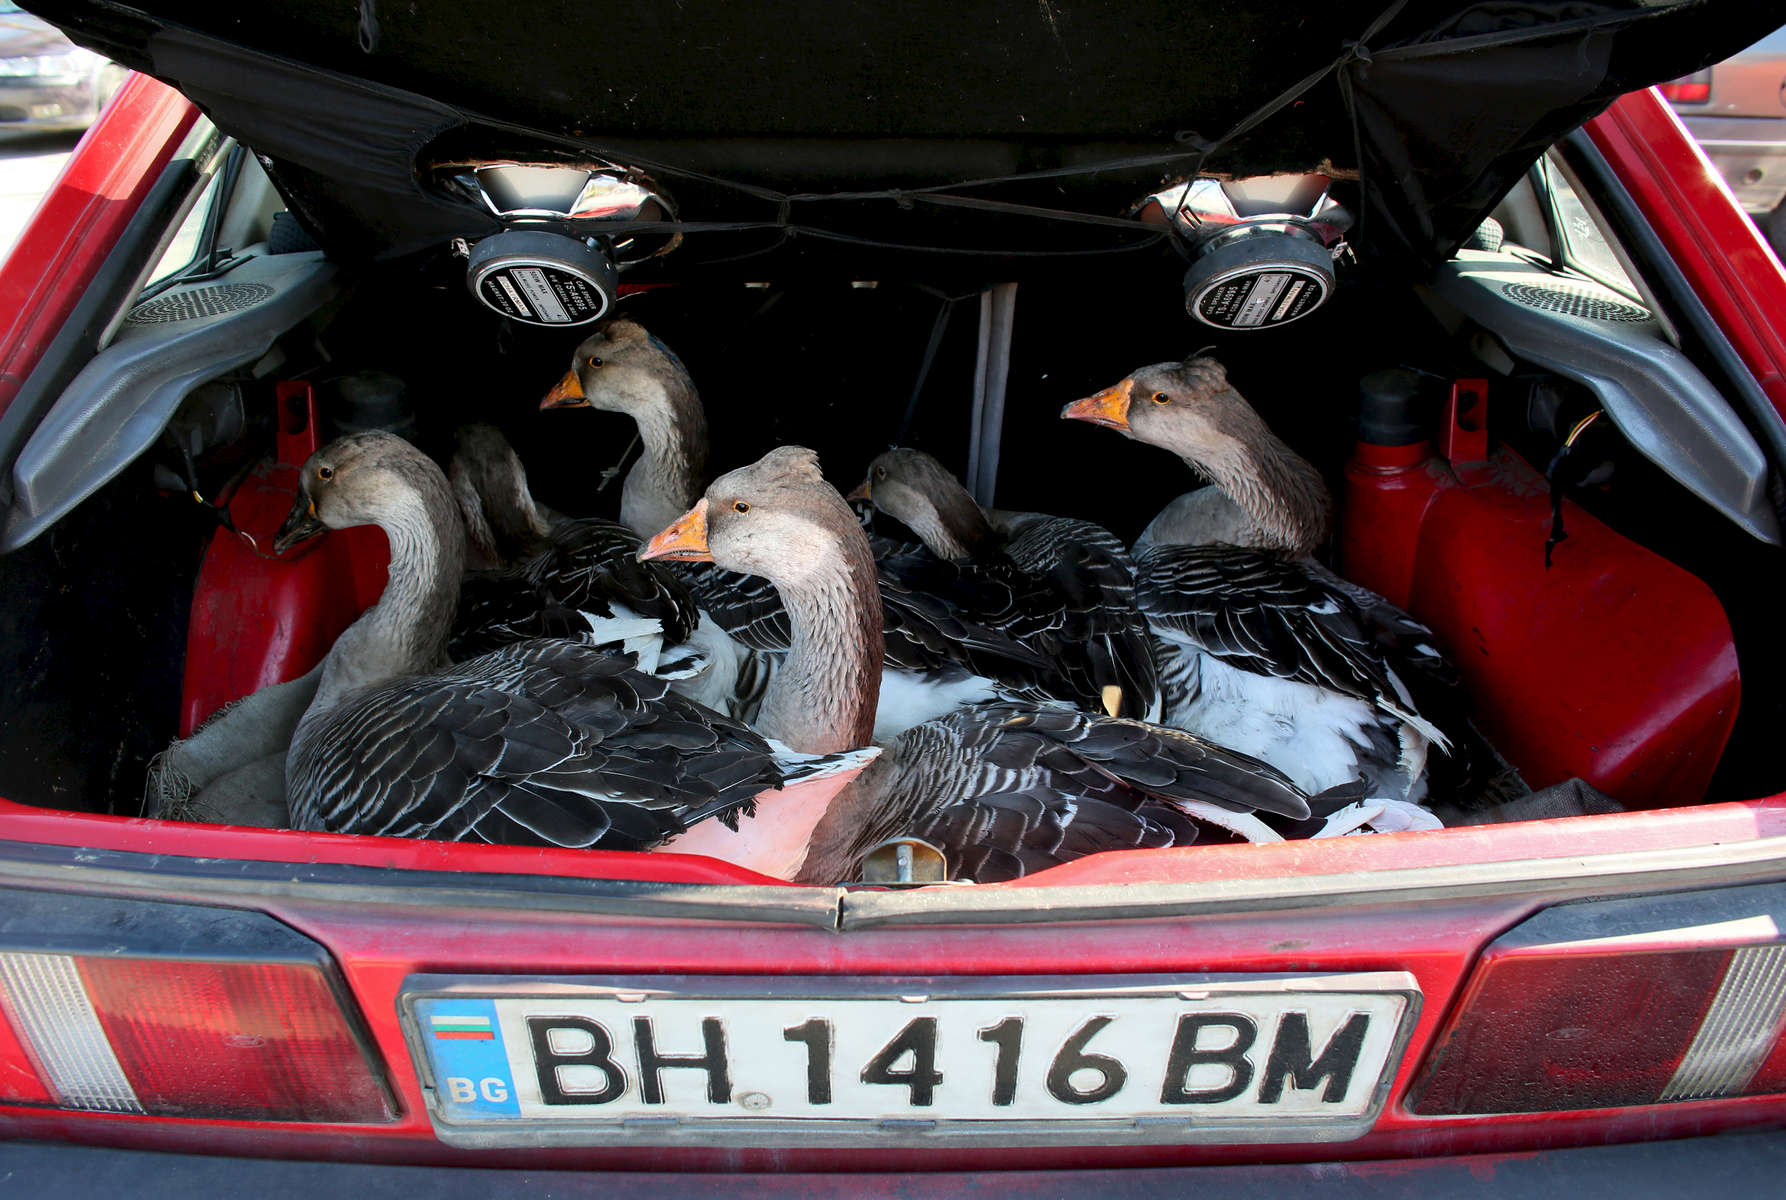 A woman sells geese from the trunk of her car, at an outdoor market in Vidin, Bulgaria on October 18th, 2014. Many Bulgarians sell personal belongings, fruit and vegetables grown at home, or resell goods as a supplement to their primary earnings. Bulgaria is still one of the poorest, most corrupt nations in the European Union, its post-1989 hopes wilted by political instability, high crime rates and skyrocketing inflation. While Bulgarians can now freely vote and protest without much threat to their freedom, their new oppressor is corruption - which is at a 15 year high, across political and civil sectors alike. Despite what democracy has changed in Bulgaria, the daily struggles of its populace remain largely untouched, trapped in a post-communist time capsule.